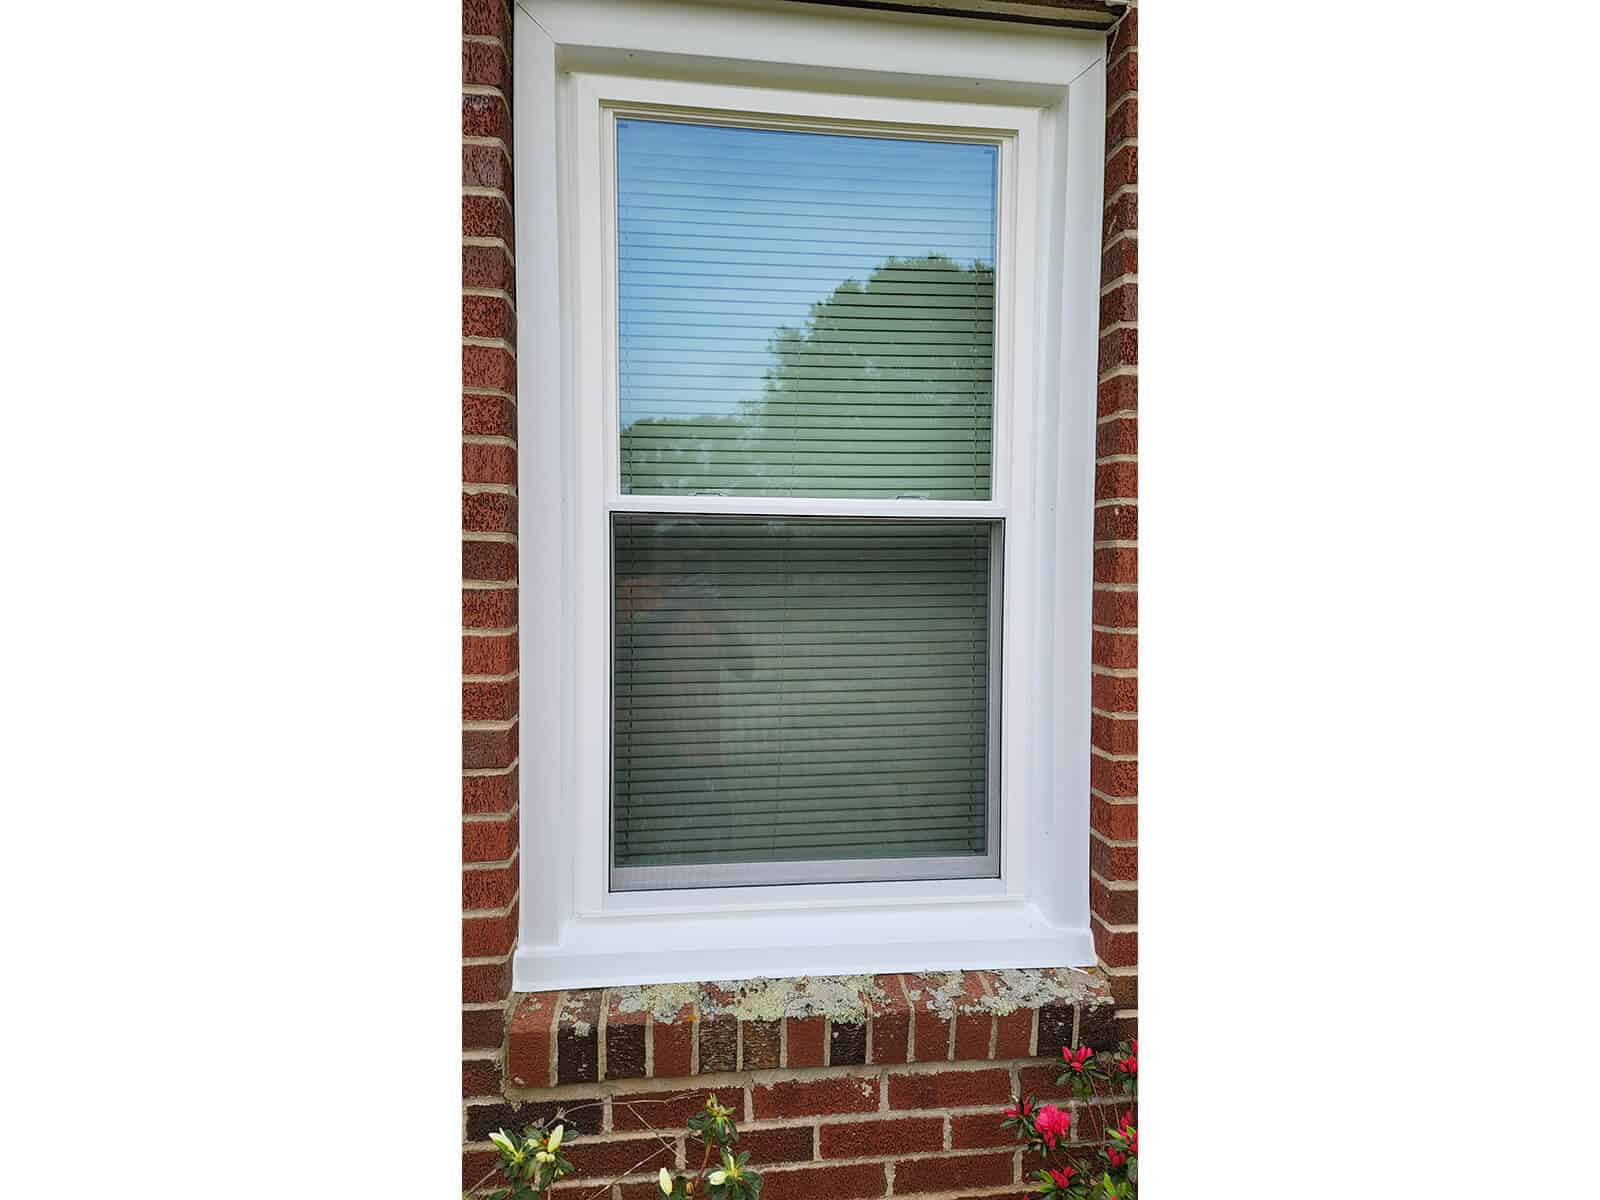 Exterior view of a brick house with a SoftLite double hung window